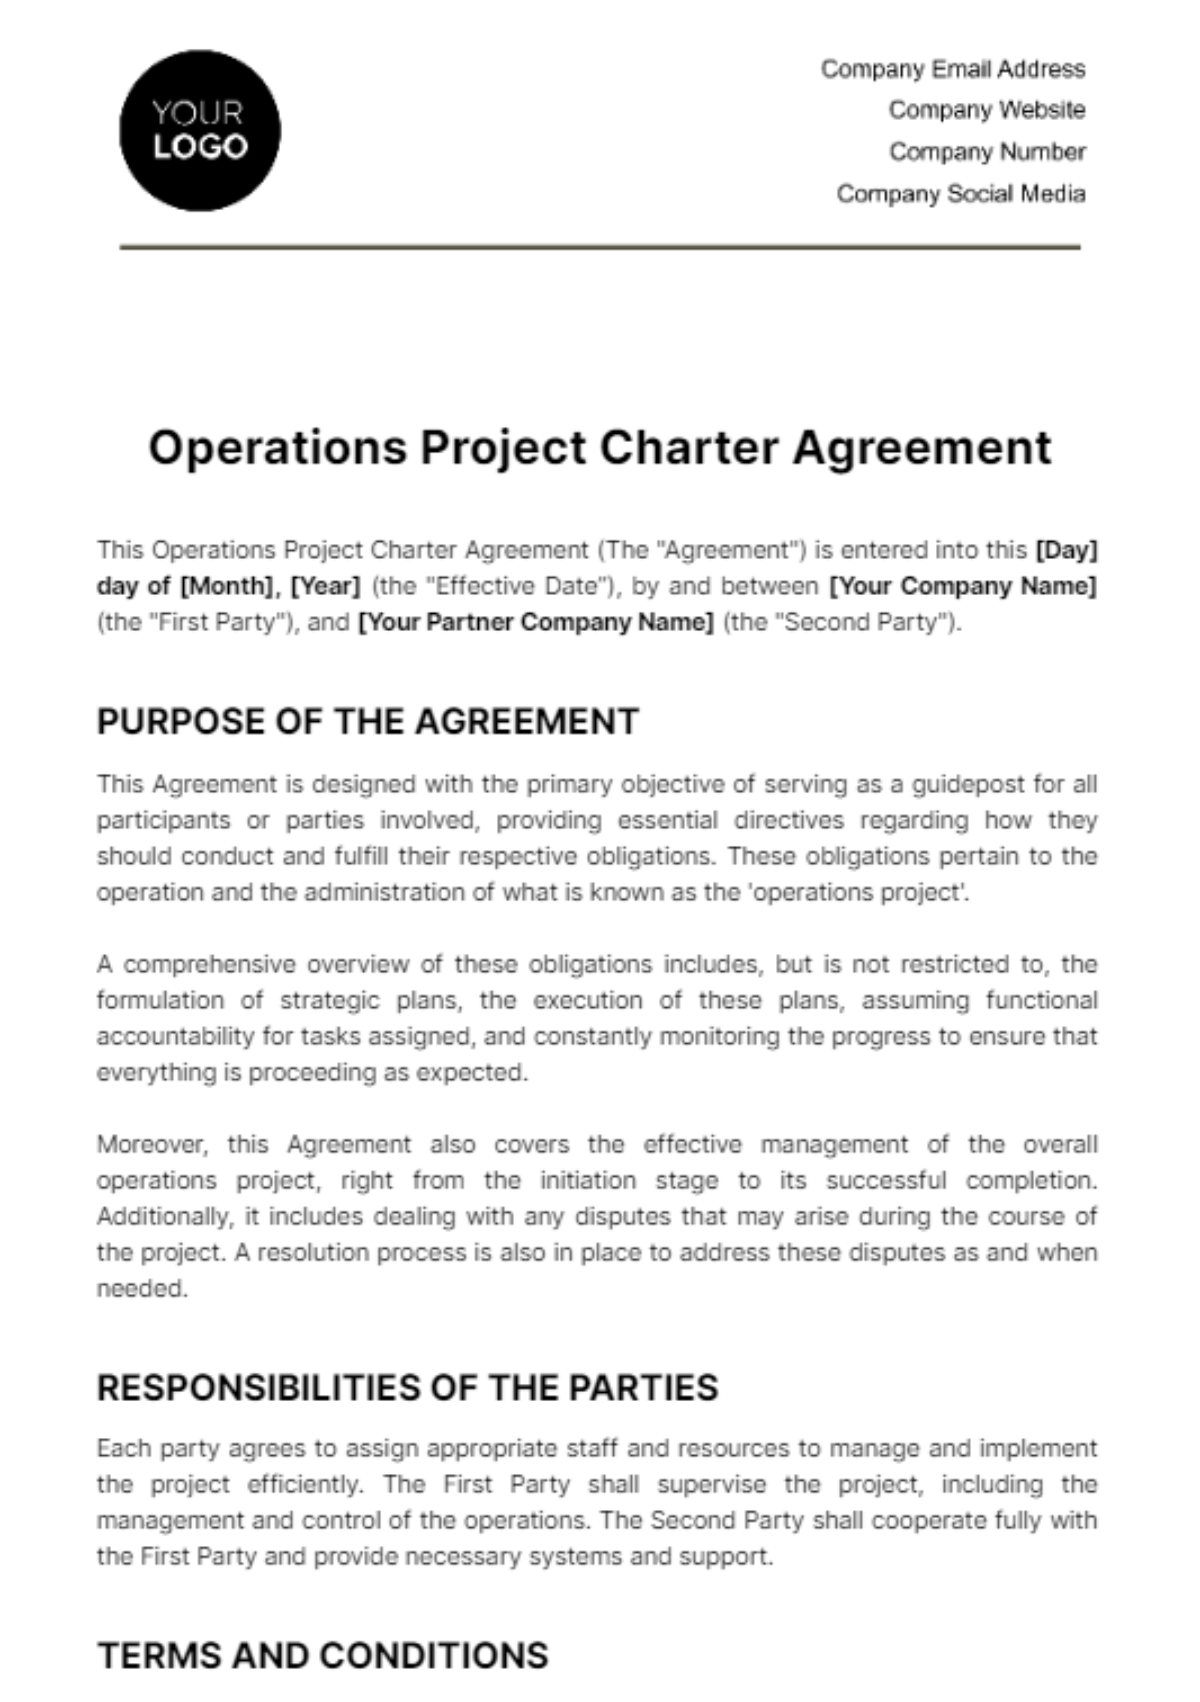 Free Operations Project Charter Agreement Template